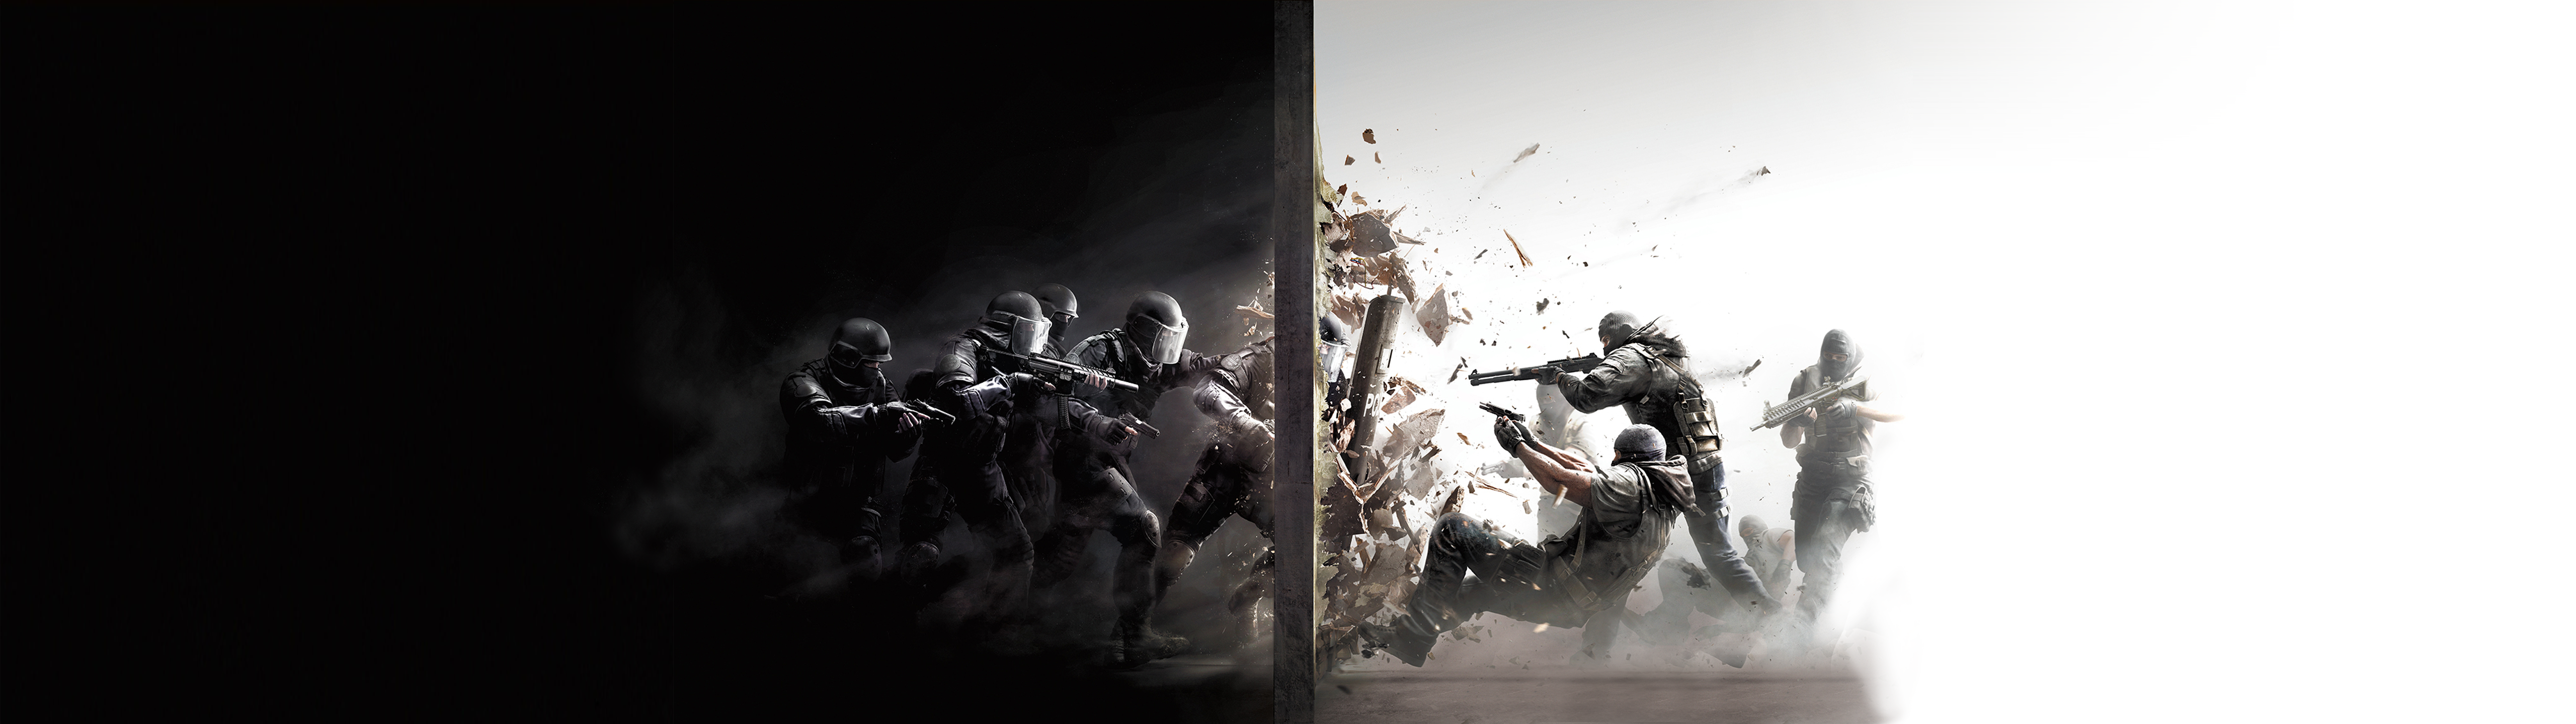 Made A Dual Monitor Wallpaper Out Of The Main R6 Promotional Image